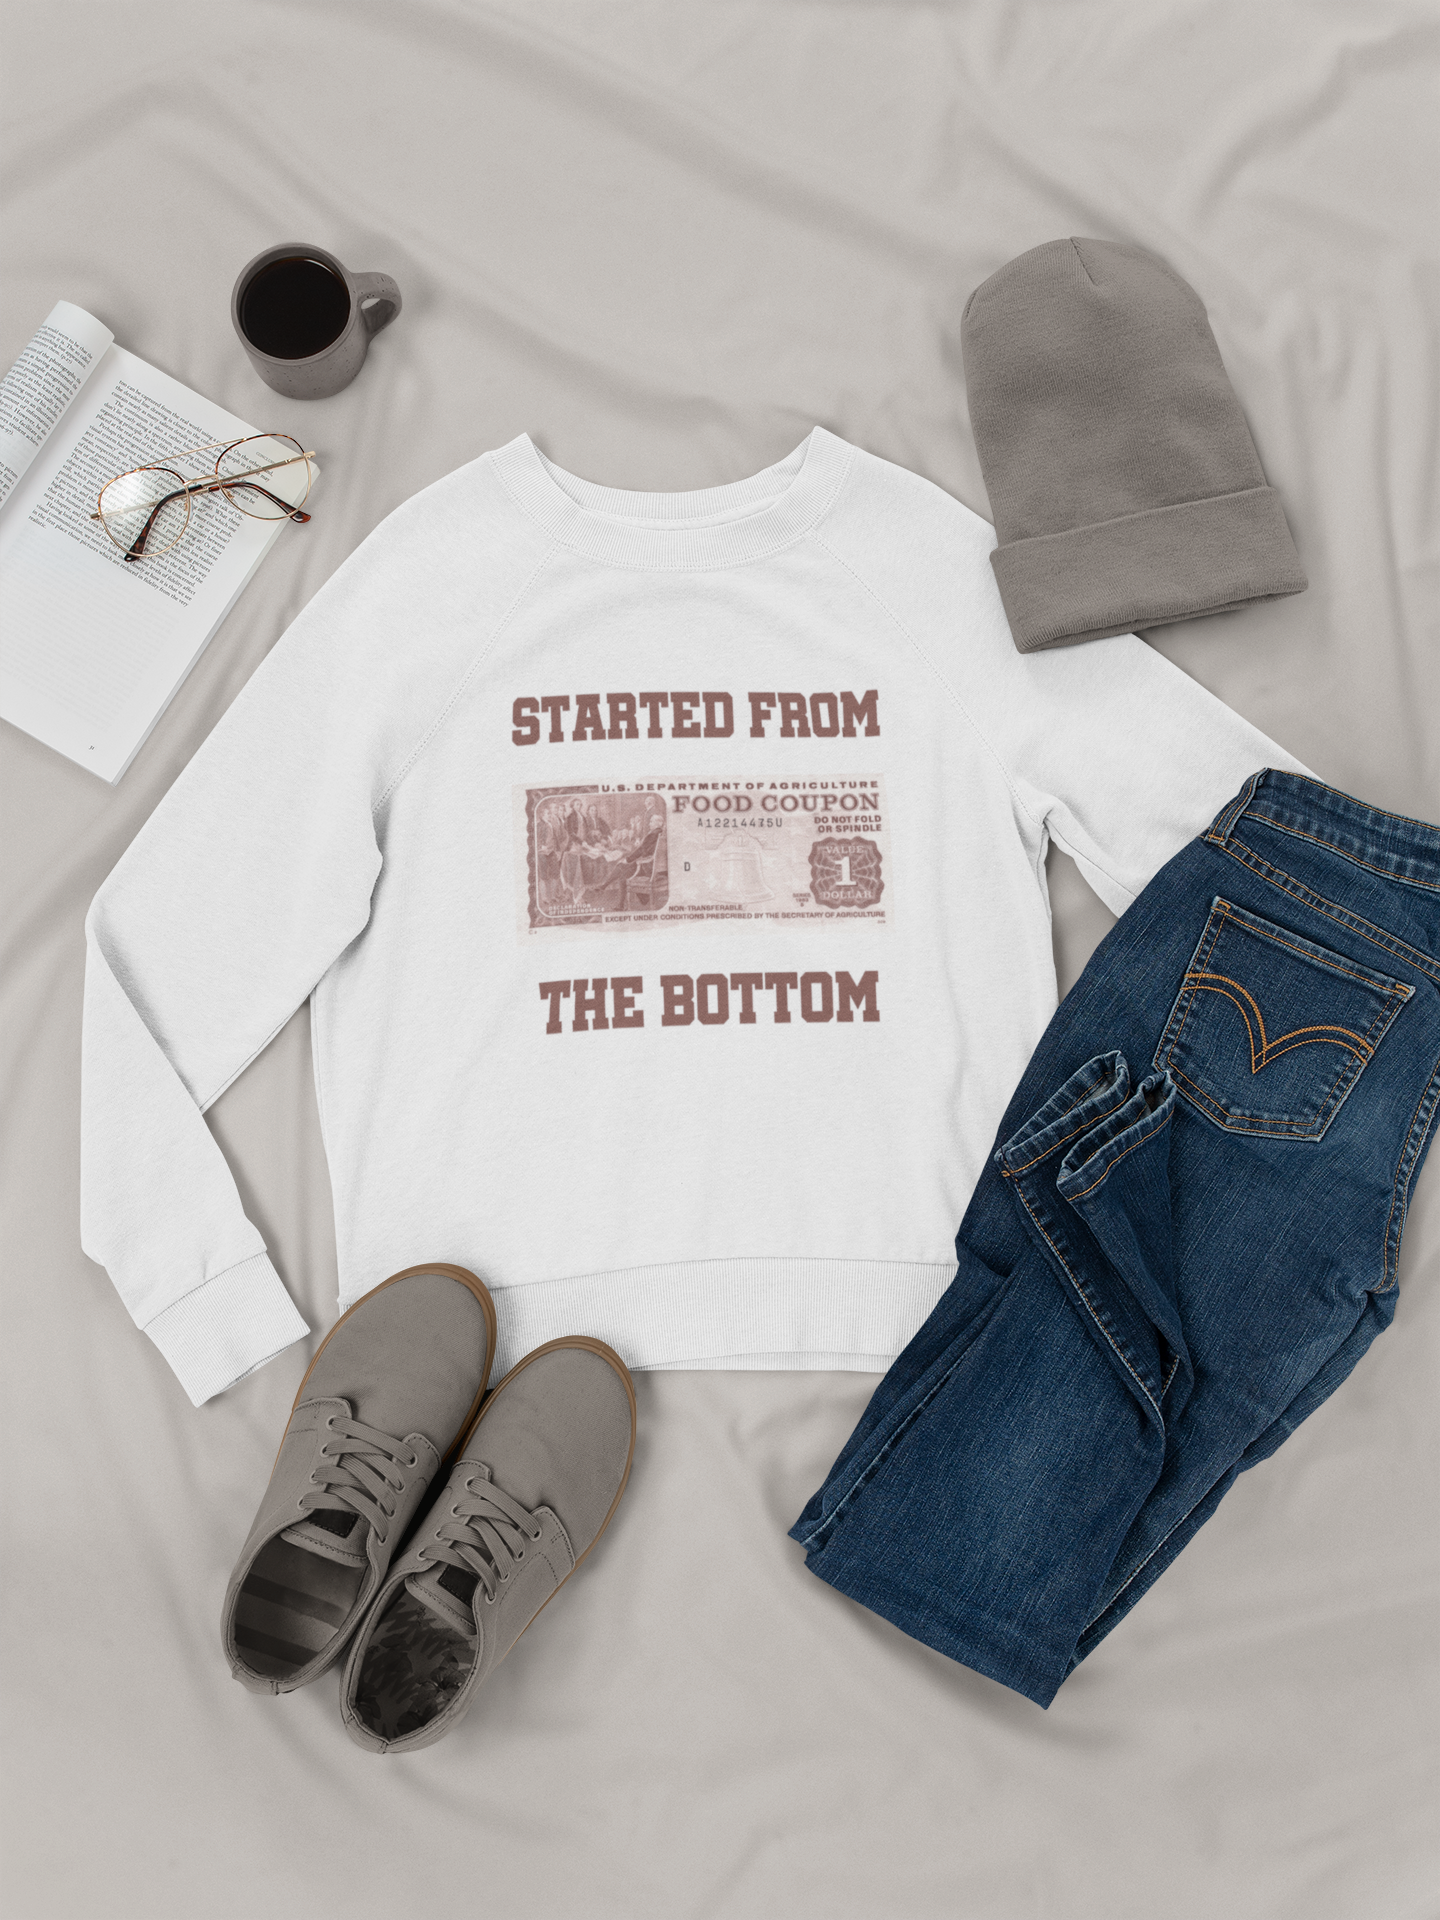 Started From the Bottom Hooded or crewneck sweatshirt